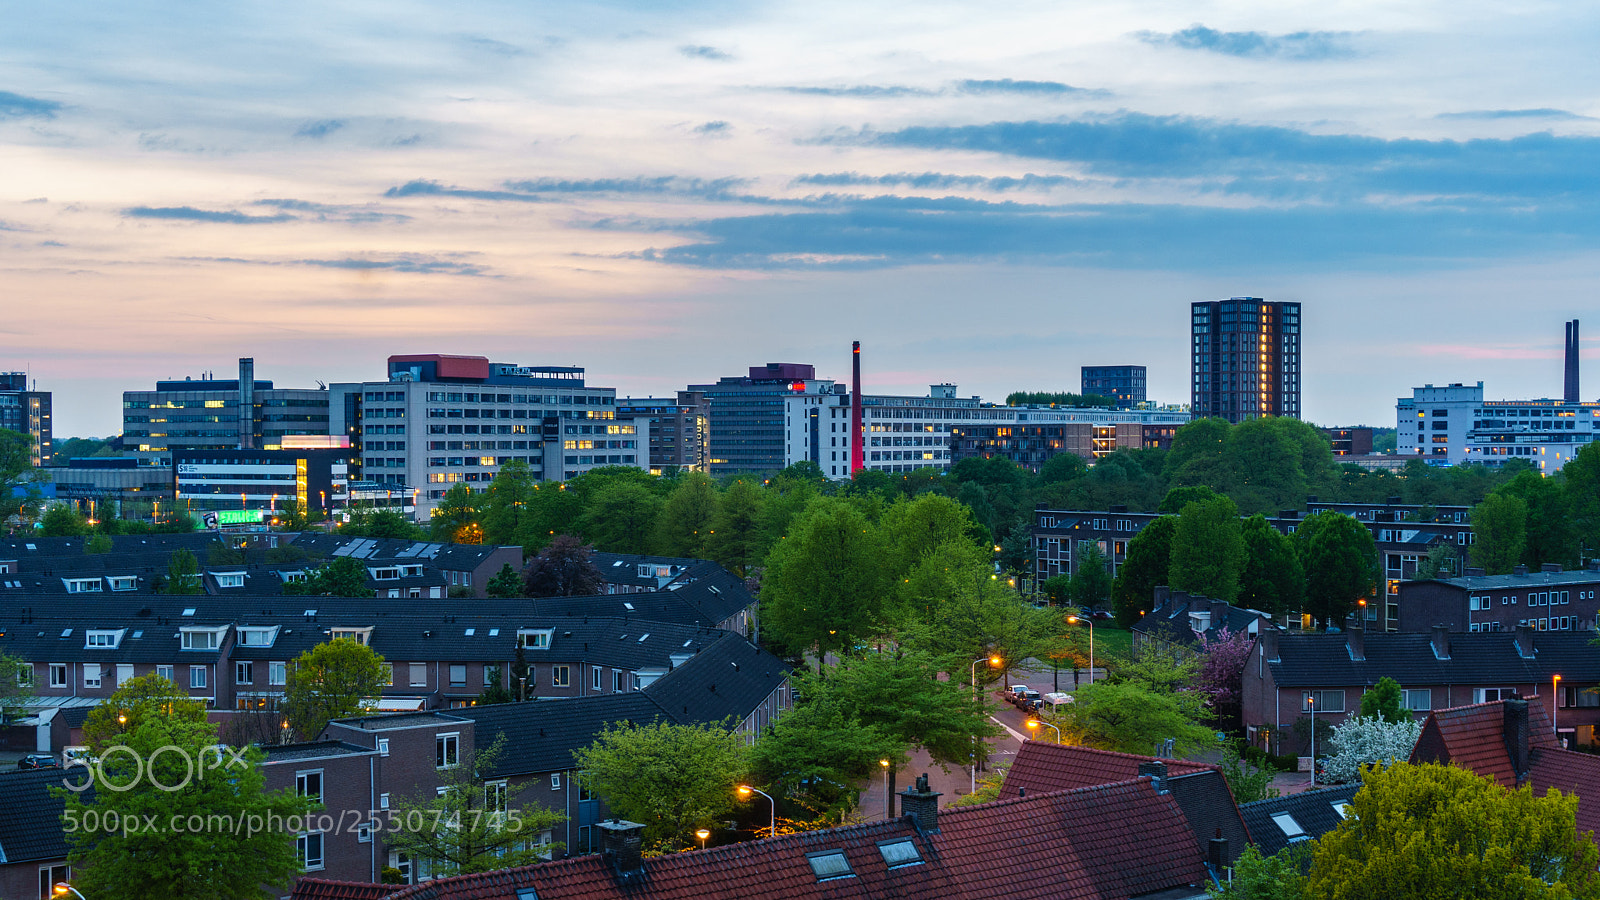 Sony a6300 sample photo. Spring in eindhoven photography